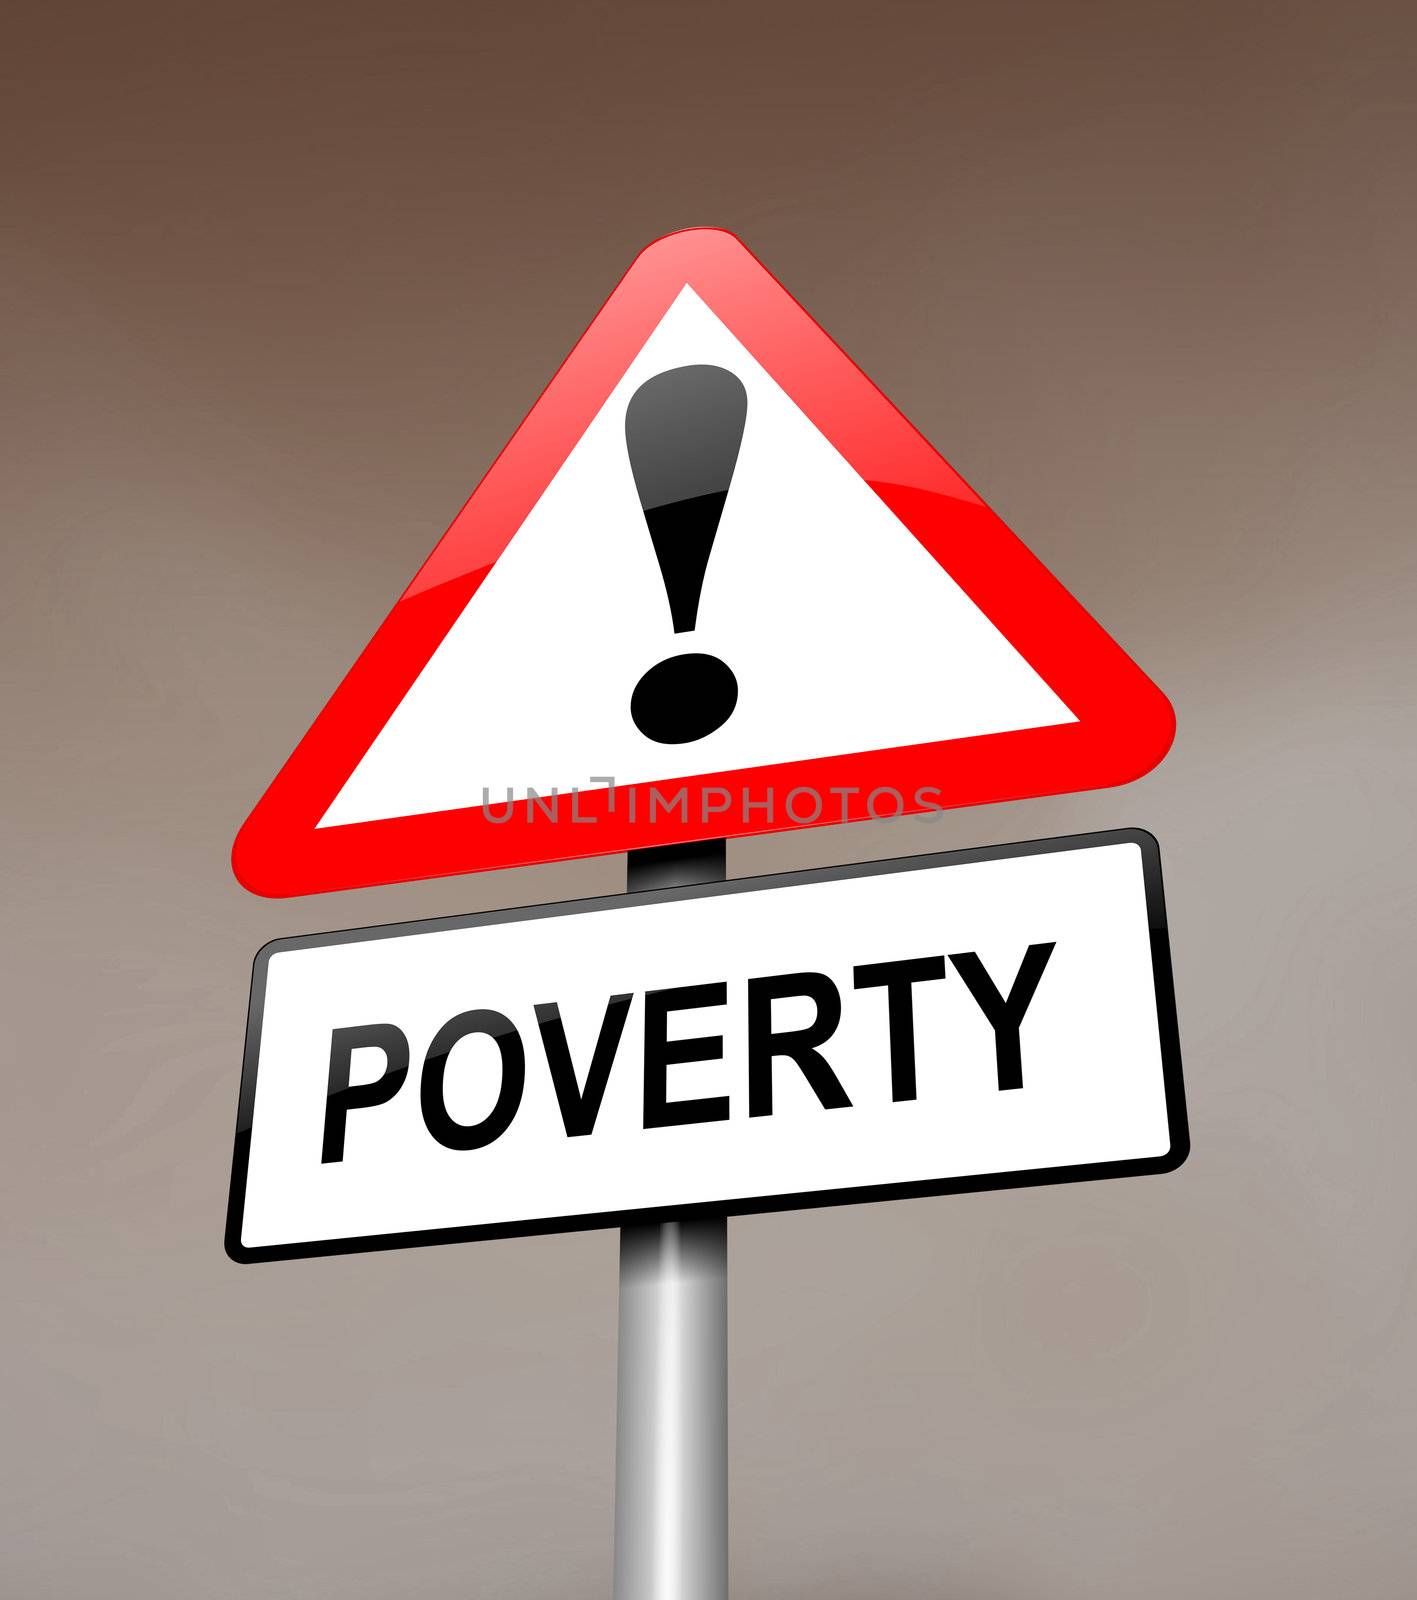 Illustration depicting a red and white triangular warning sign with a poverty concept.Dark blurred sky background.